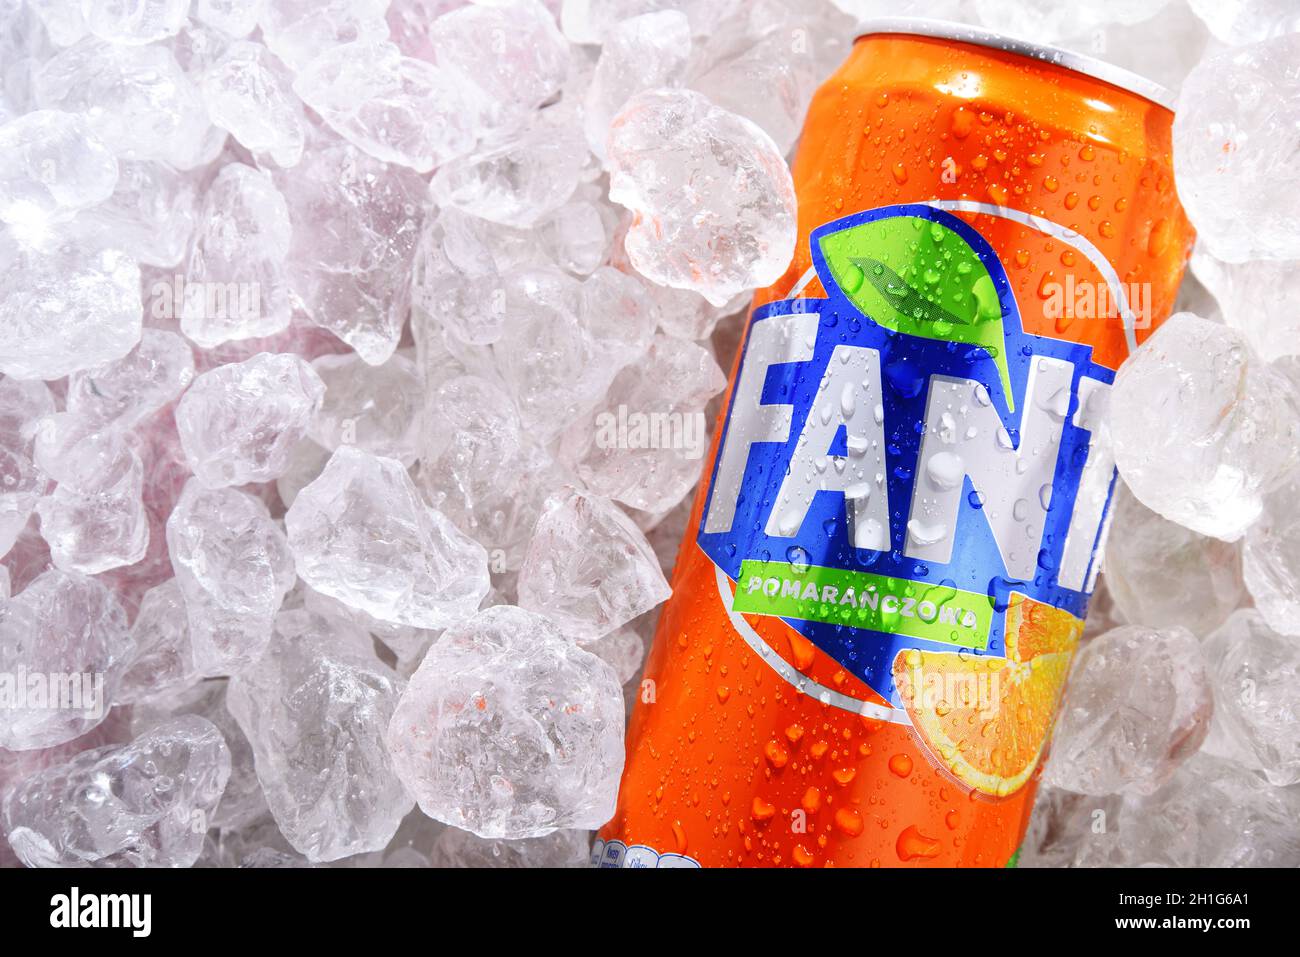 POZNAN, POL - JUN 10, 2020: Can of Fanta, a global brand of fruit-flavored carbonated soft drinks created by The Coca-Cola Company in Germany in 1940 Stock Photo